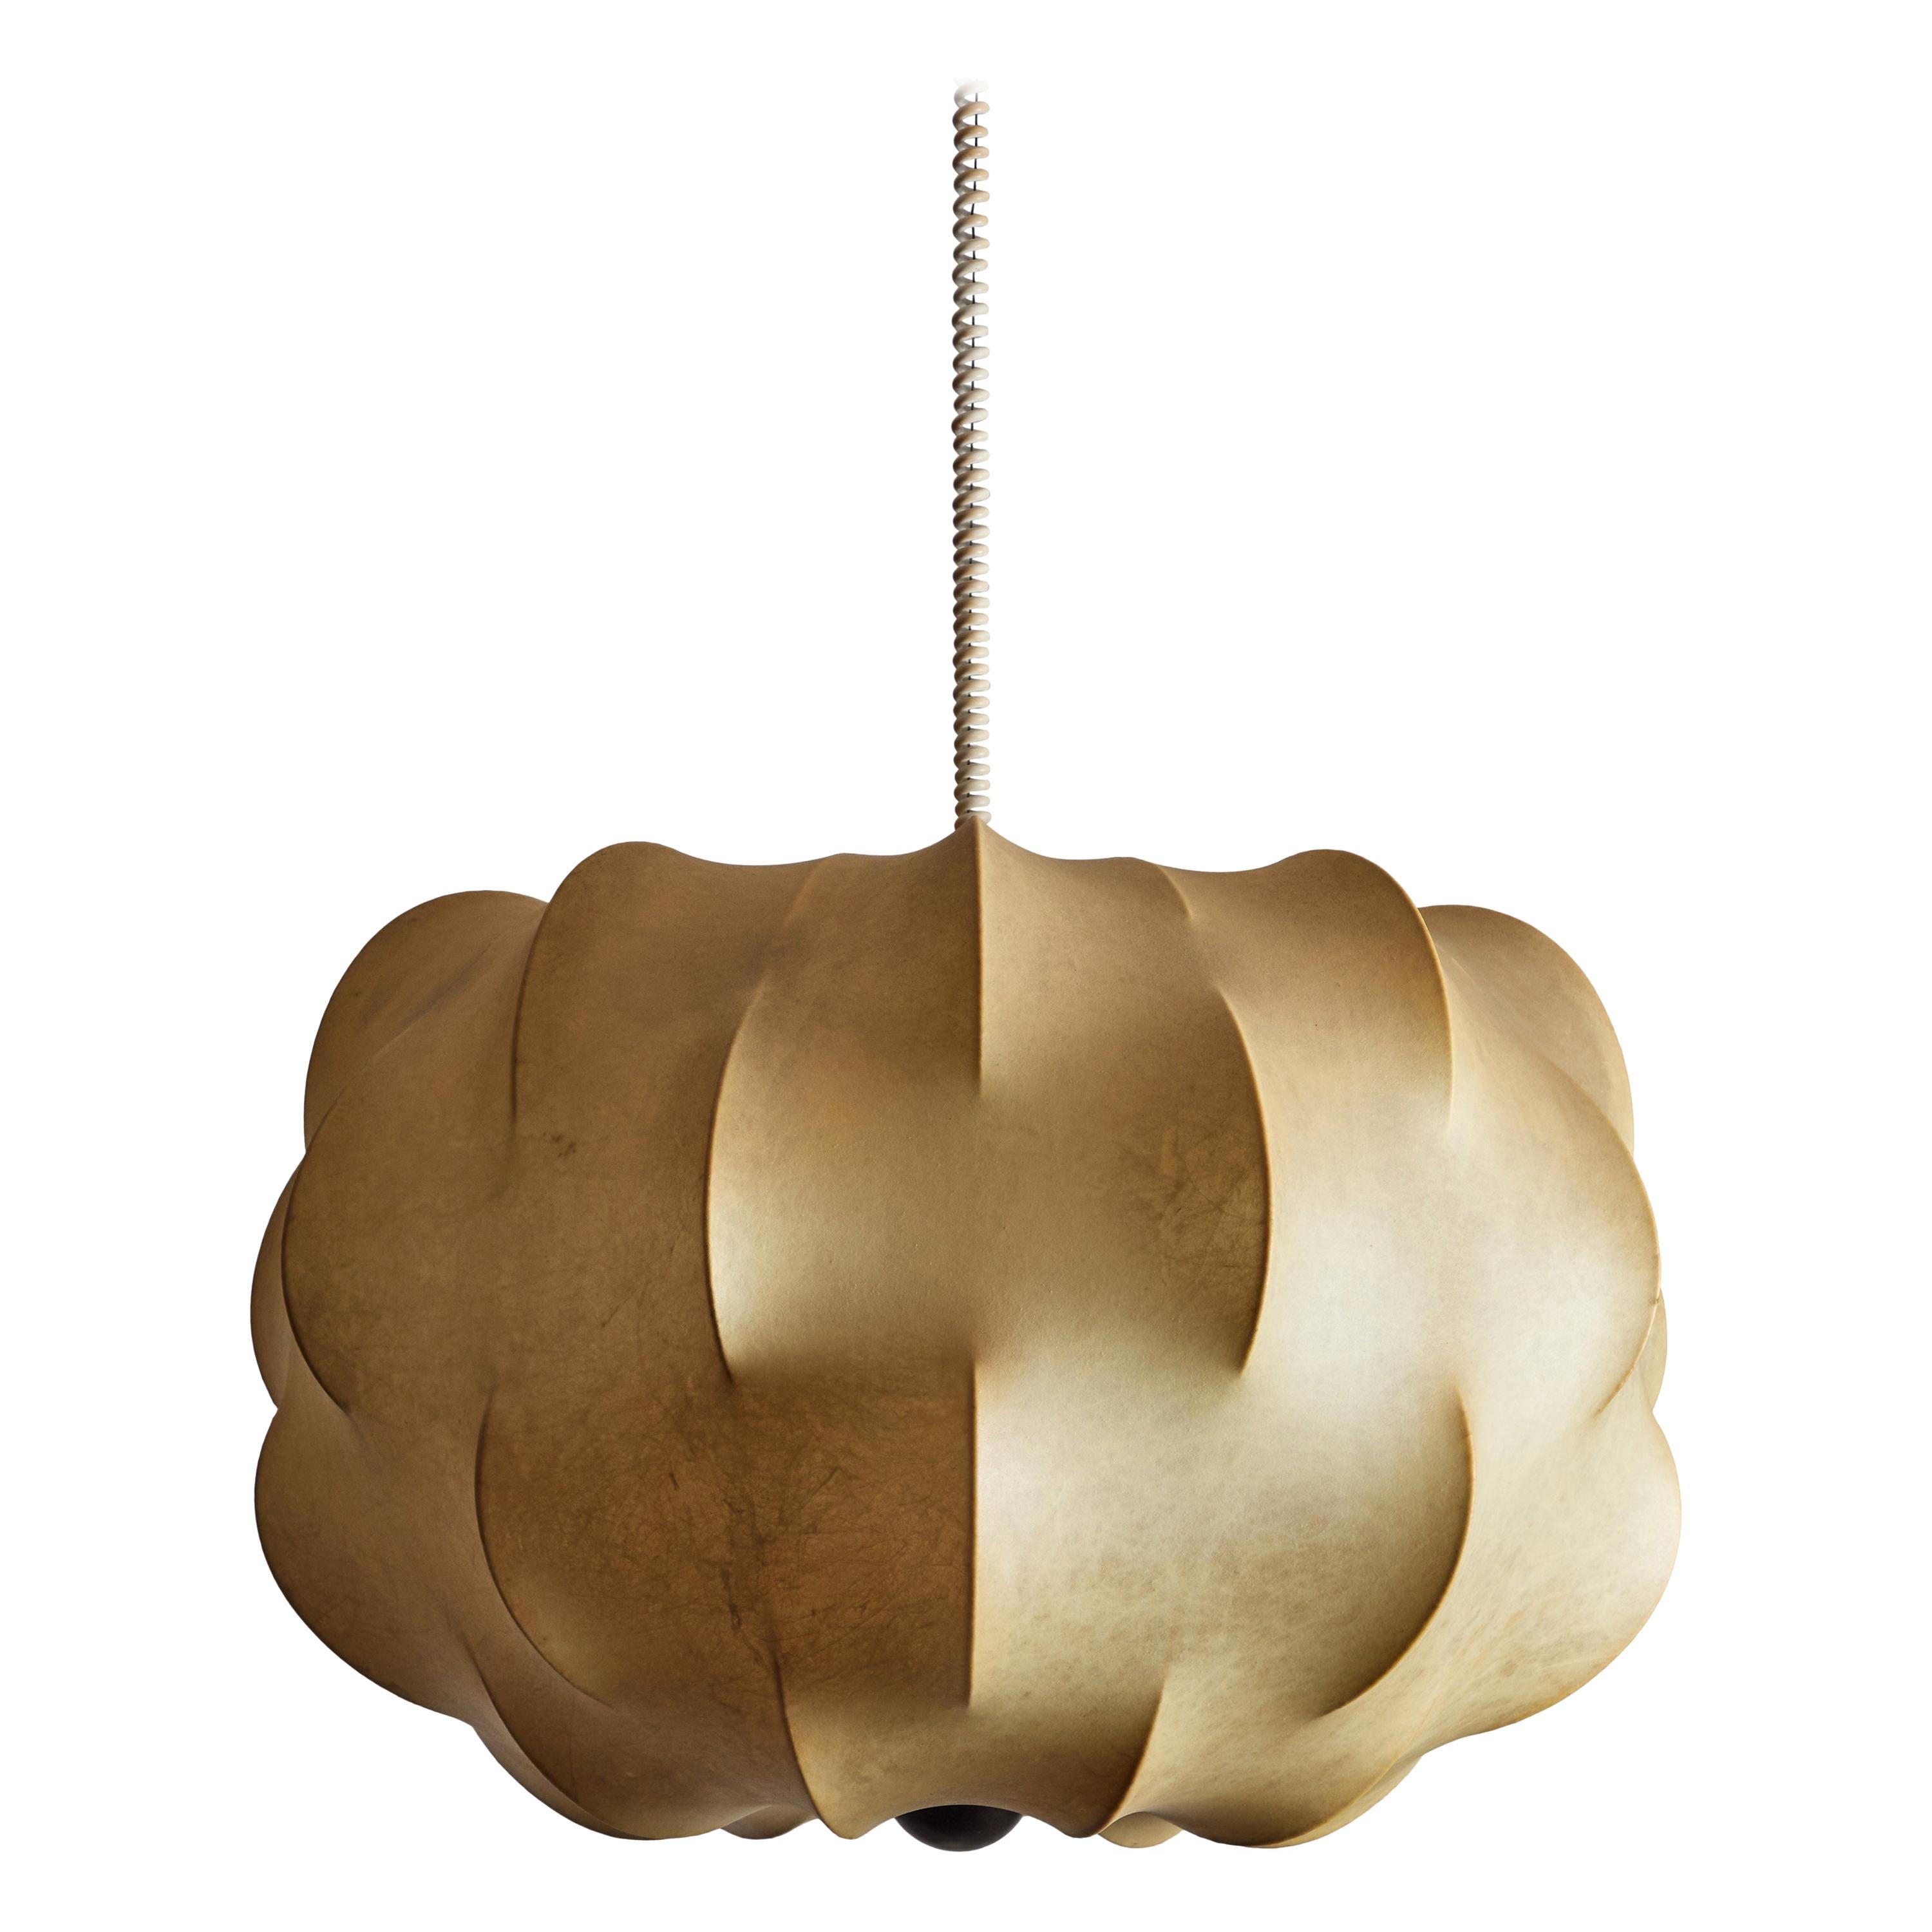 "Nuvola" Suspension Light by Tobia Scarpa for Flos